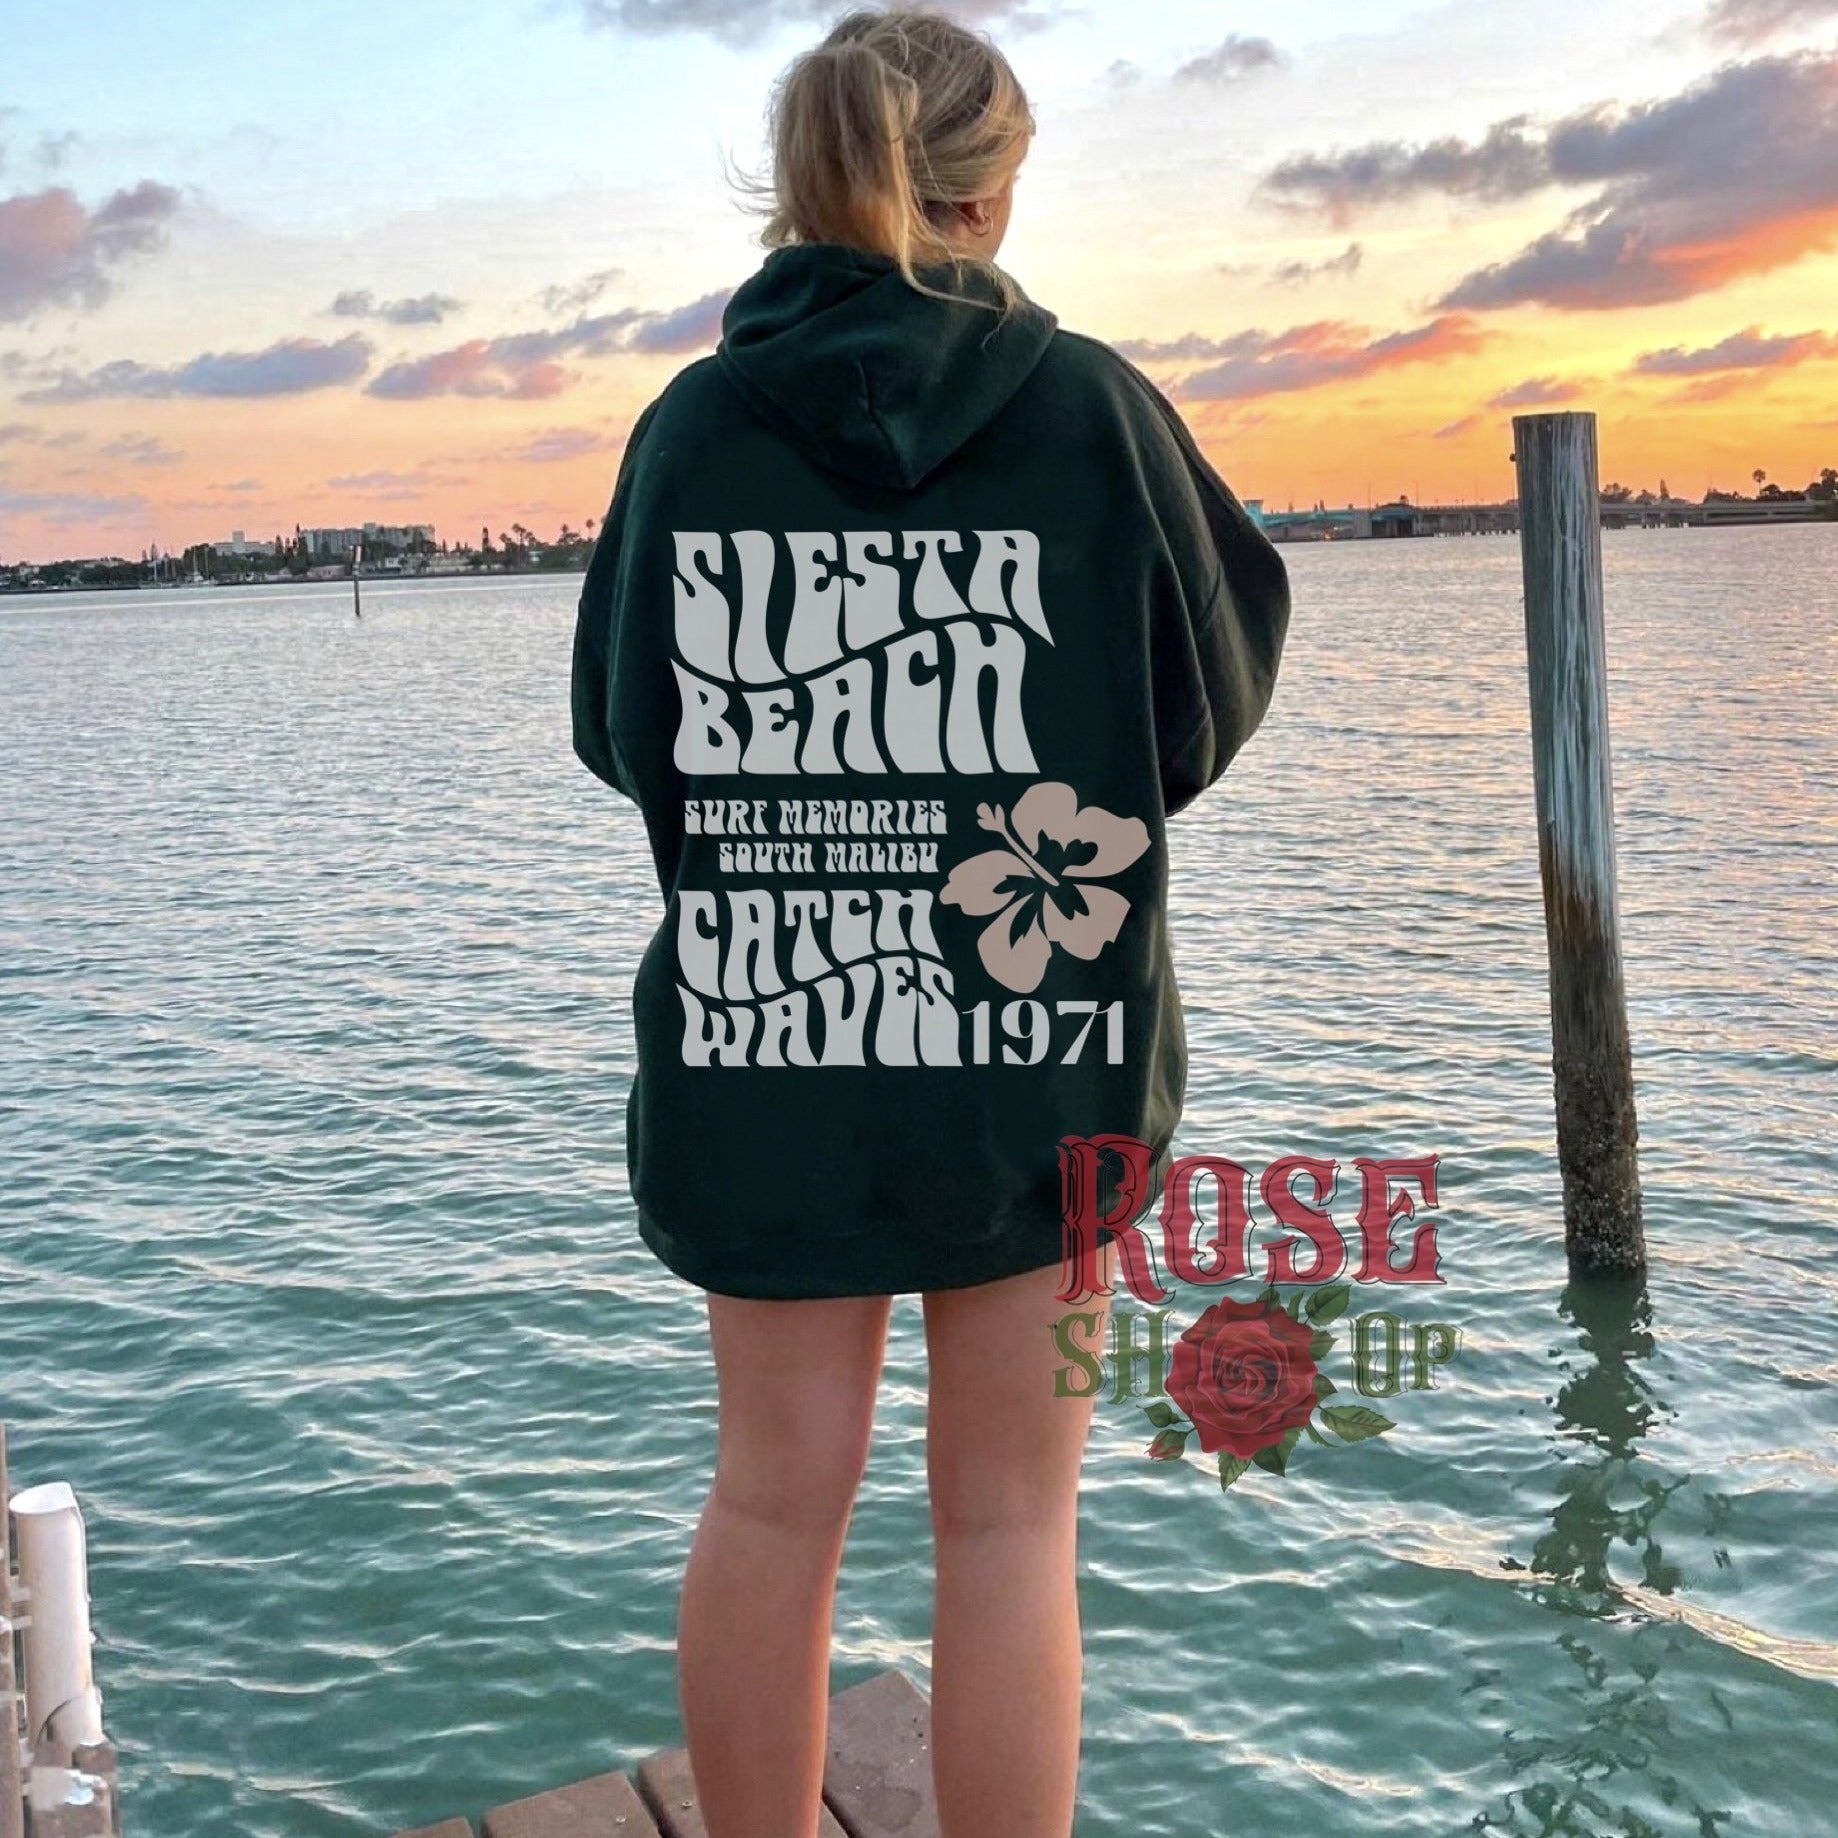 CheeryVibes It's A Good Day to Have A Good Day Hoodie- Siesta Beach- Aesthetic, Trendy Sweatshirt, Brown Hoodie, Green, Oversized, Vsco, Tumblr